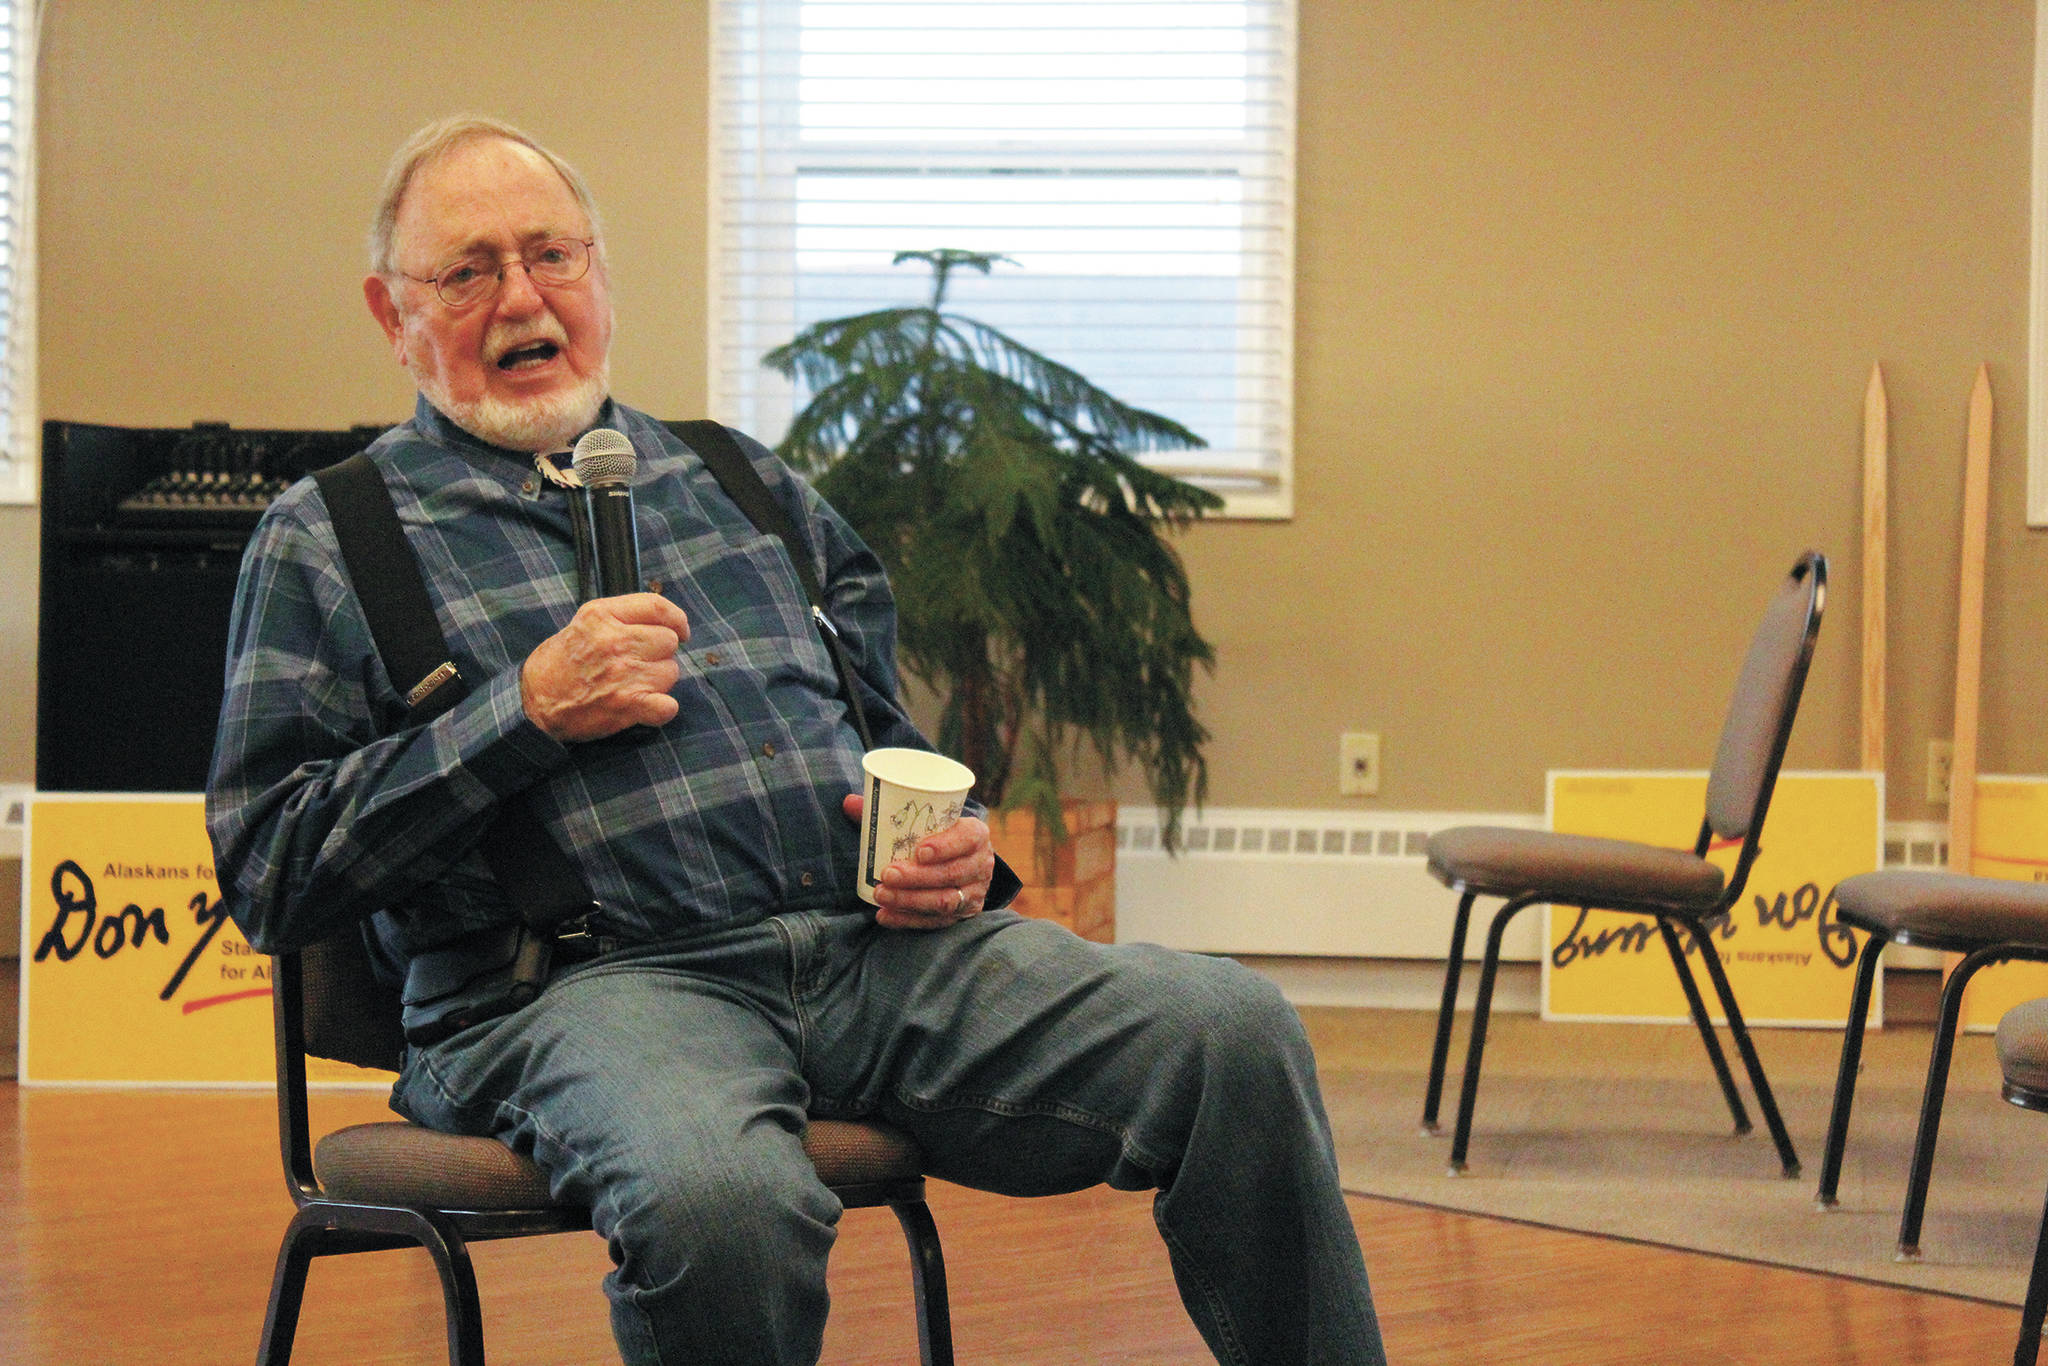 Rep. Don Young speaks during a campaign event Tuesday, Oct. 20, 2020 at Land’s End Resort in Homer, Alaska. (Photo by Megan Pacer / Homer News File)